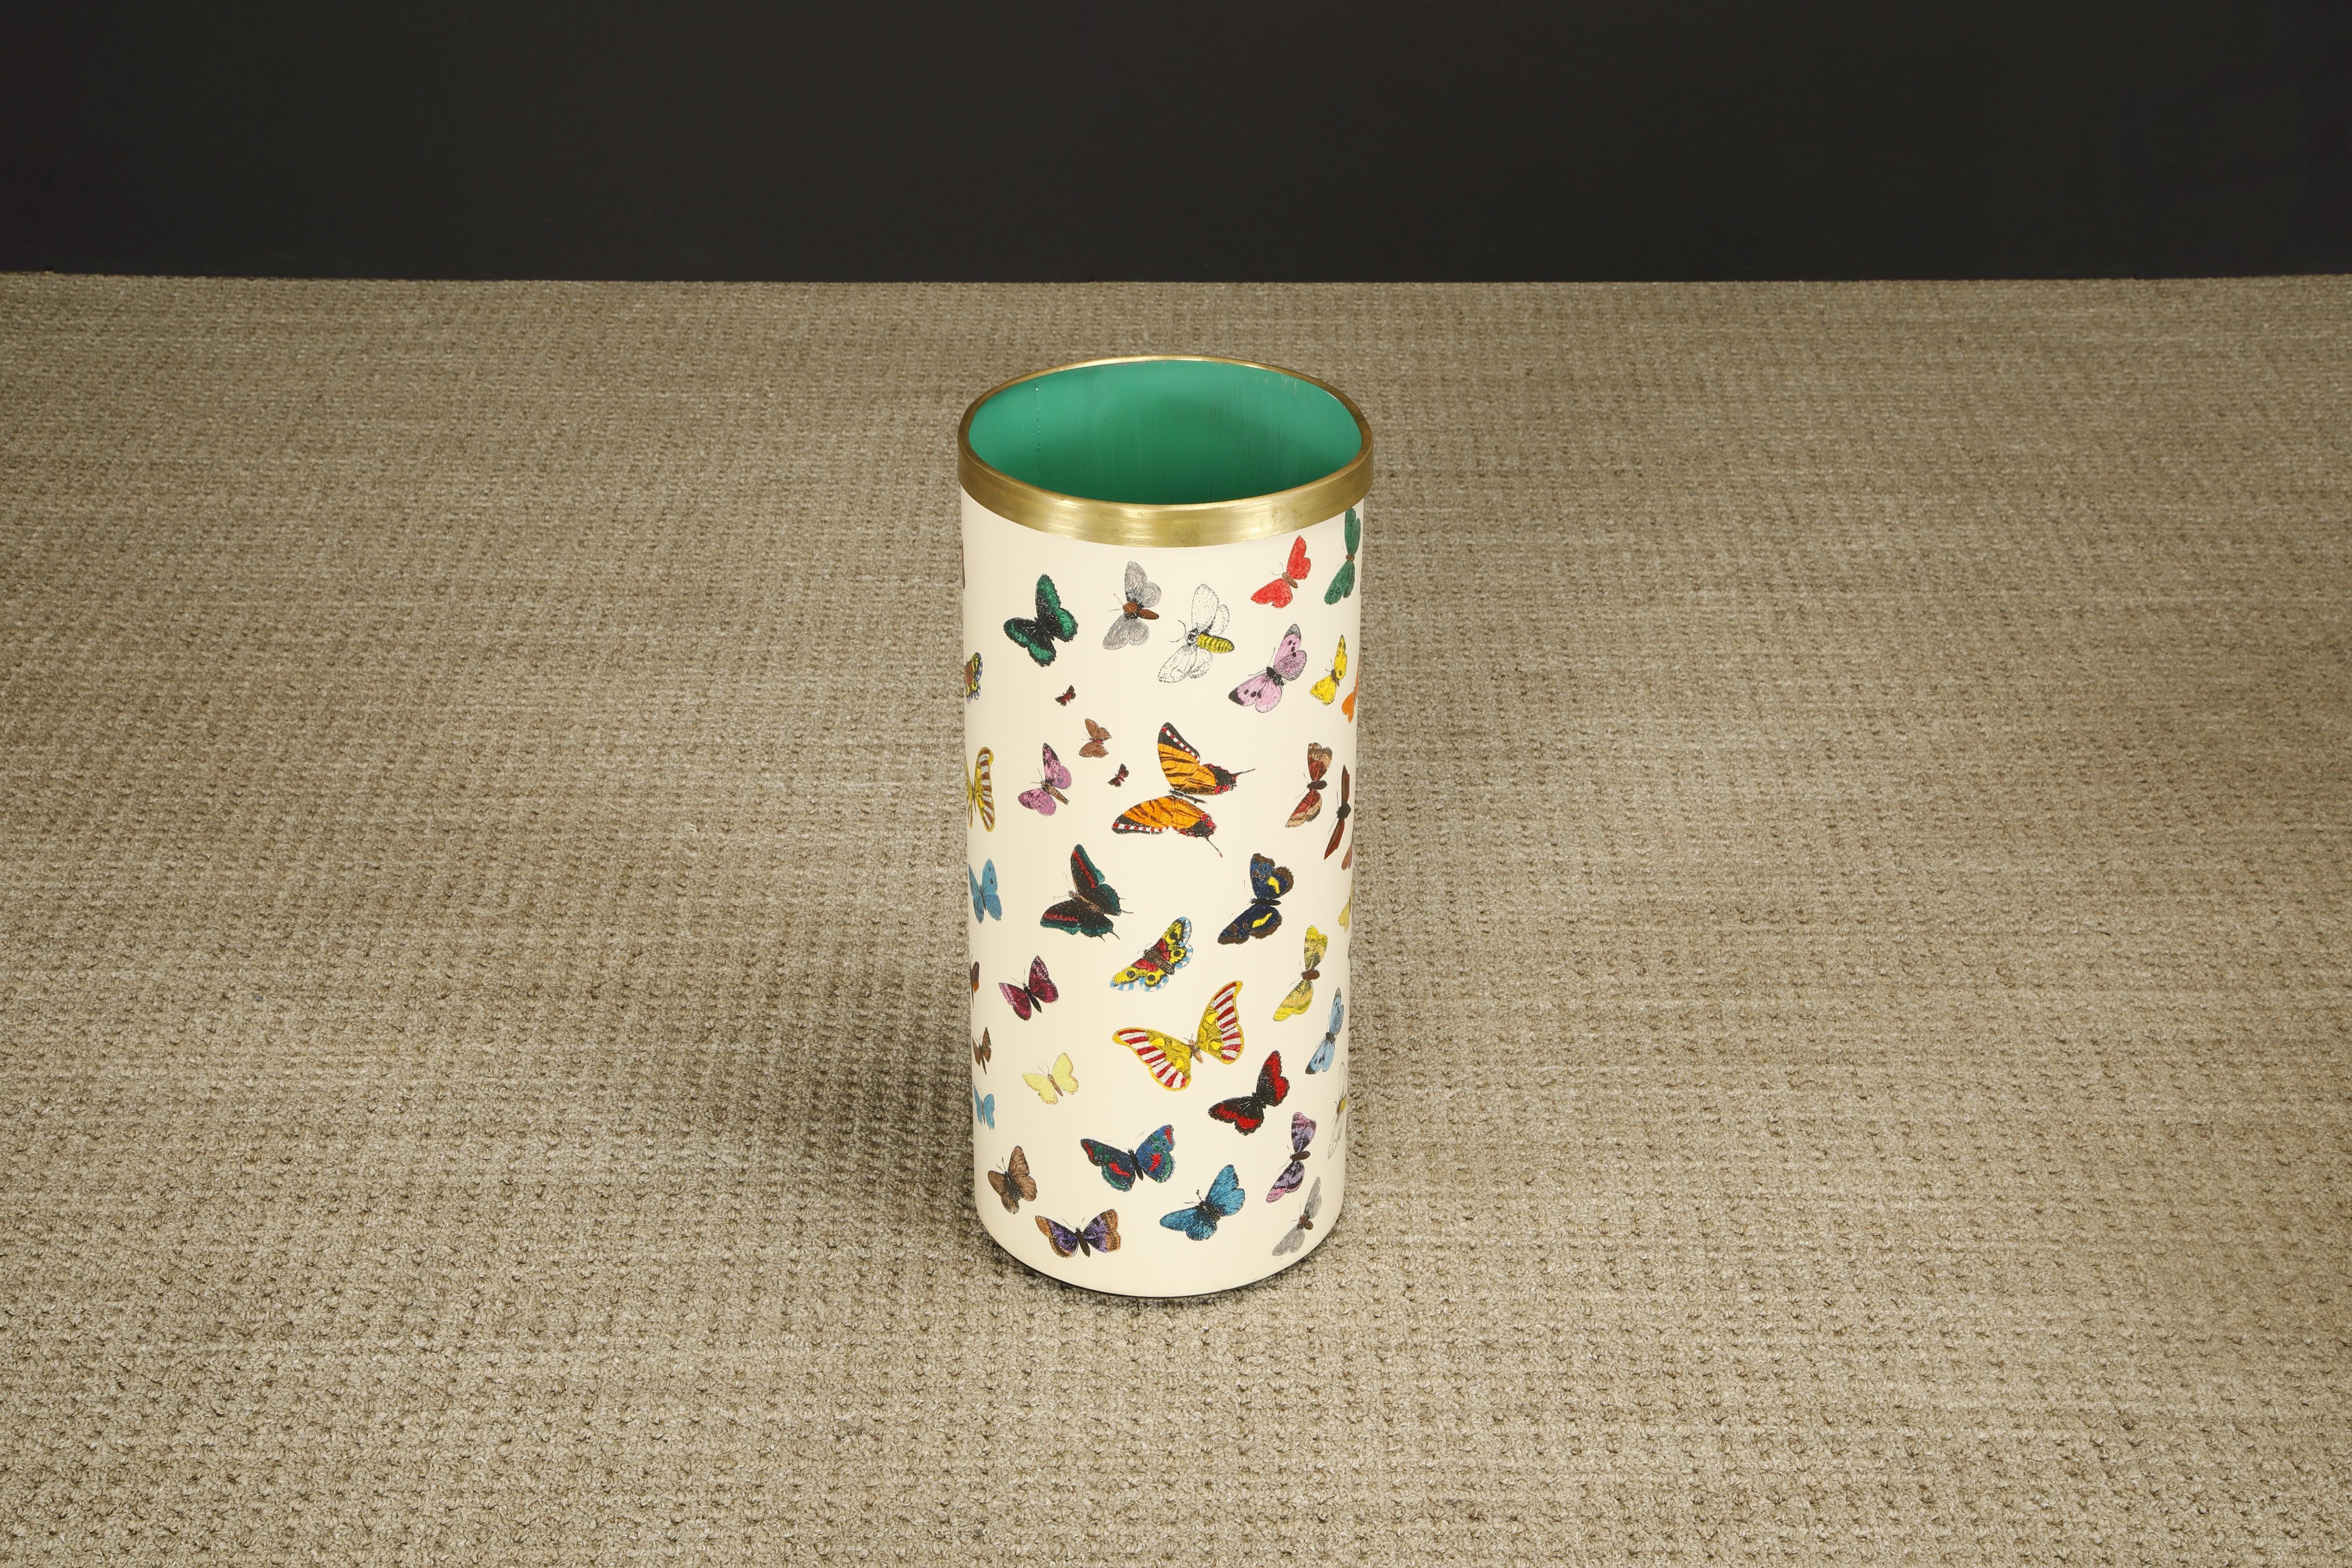 Mid-Century Modern 'Butterflies' Umbrella Stand by Piero Fornasetti, circa 1960s Italy, Signed  For Sale